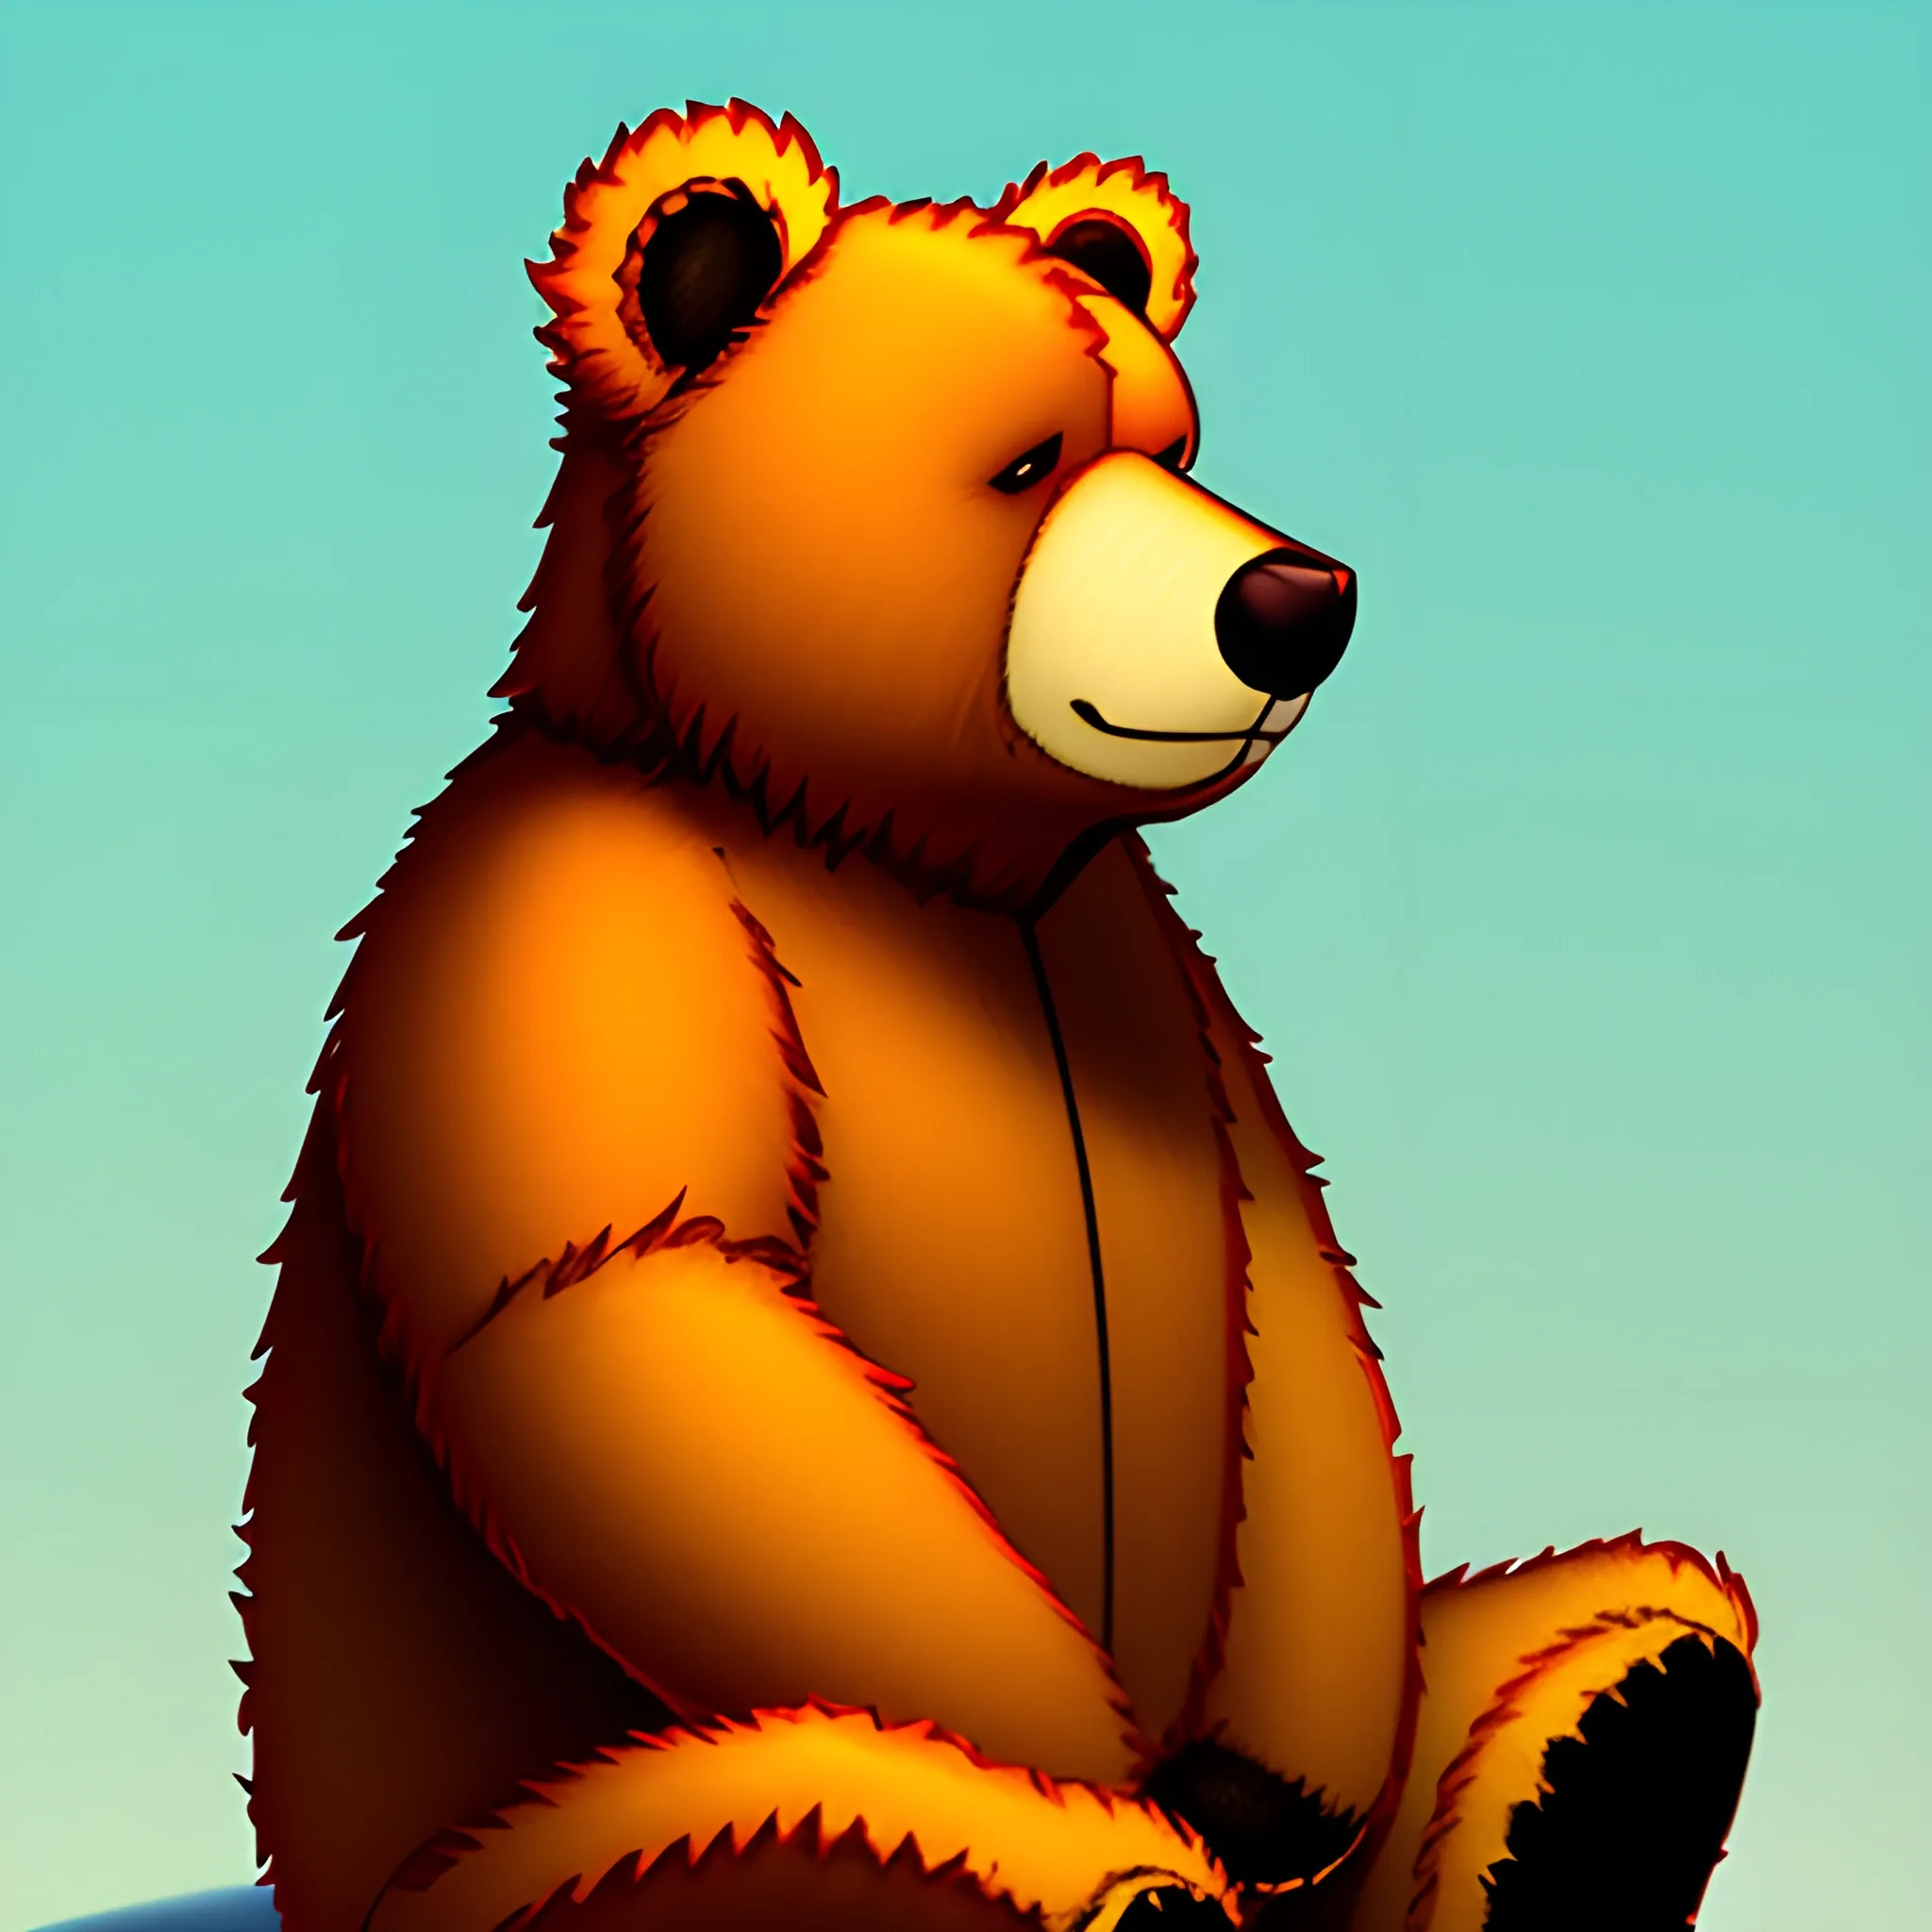 illustration of small teddy bear sitting in profile, illuminated with side light, digital painting style with warm colors.